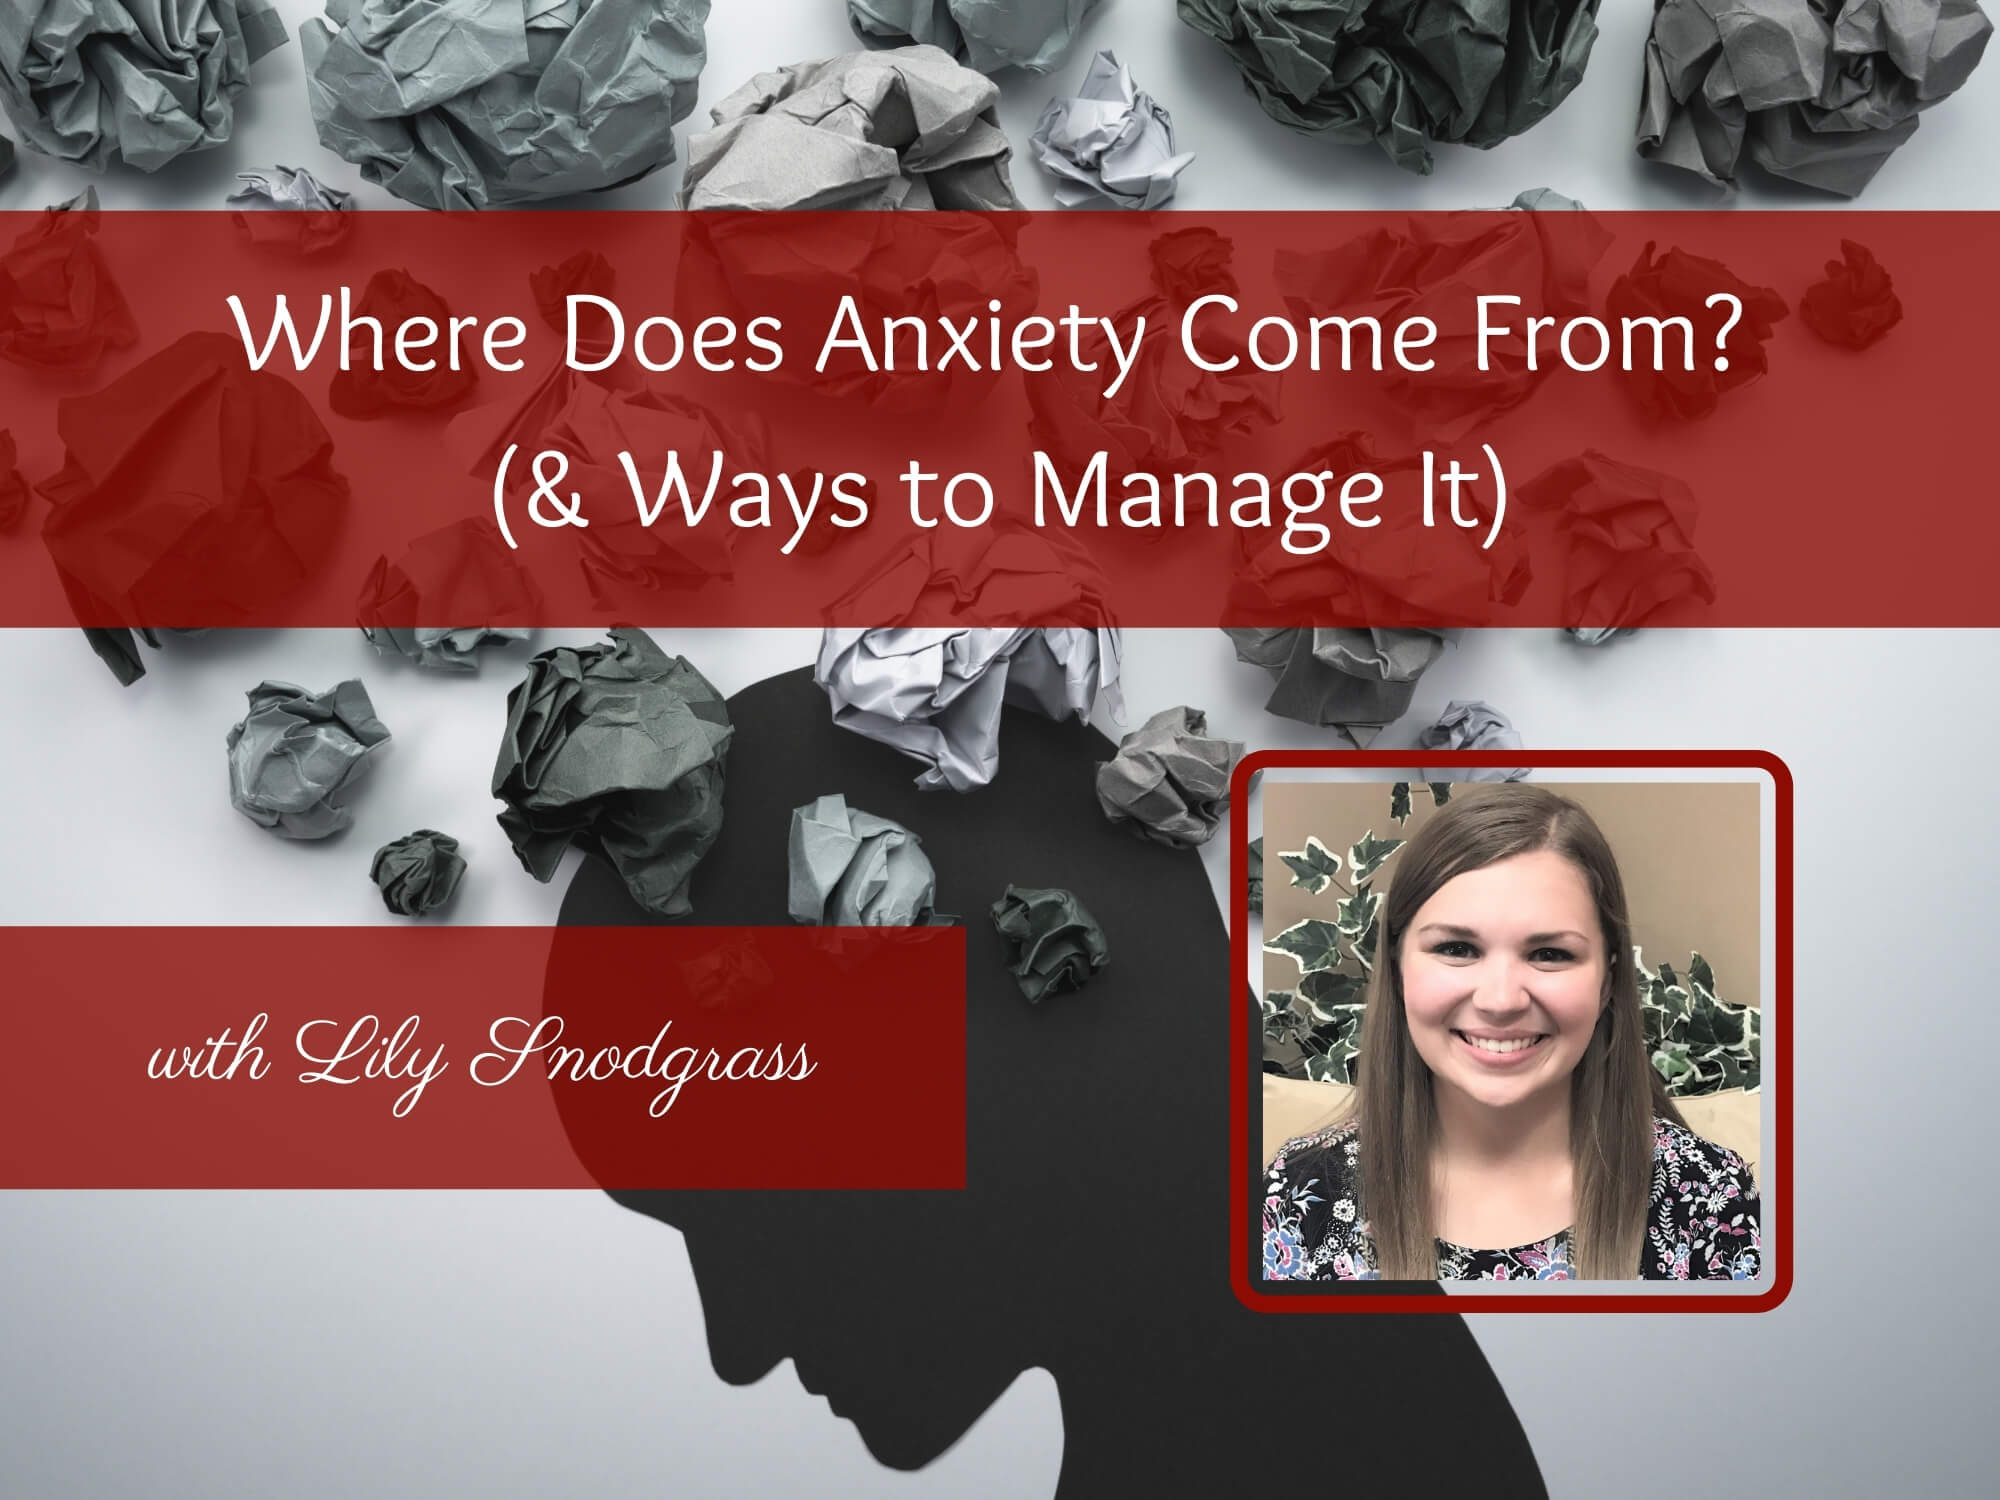 Where Does Anxiety Come From? (& Ways to Manage It)